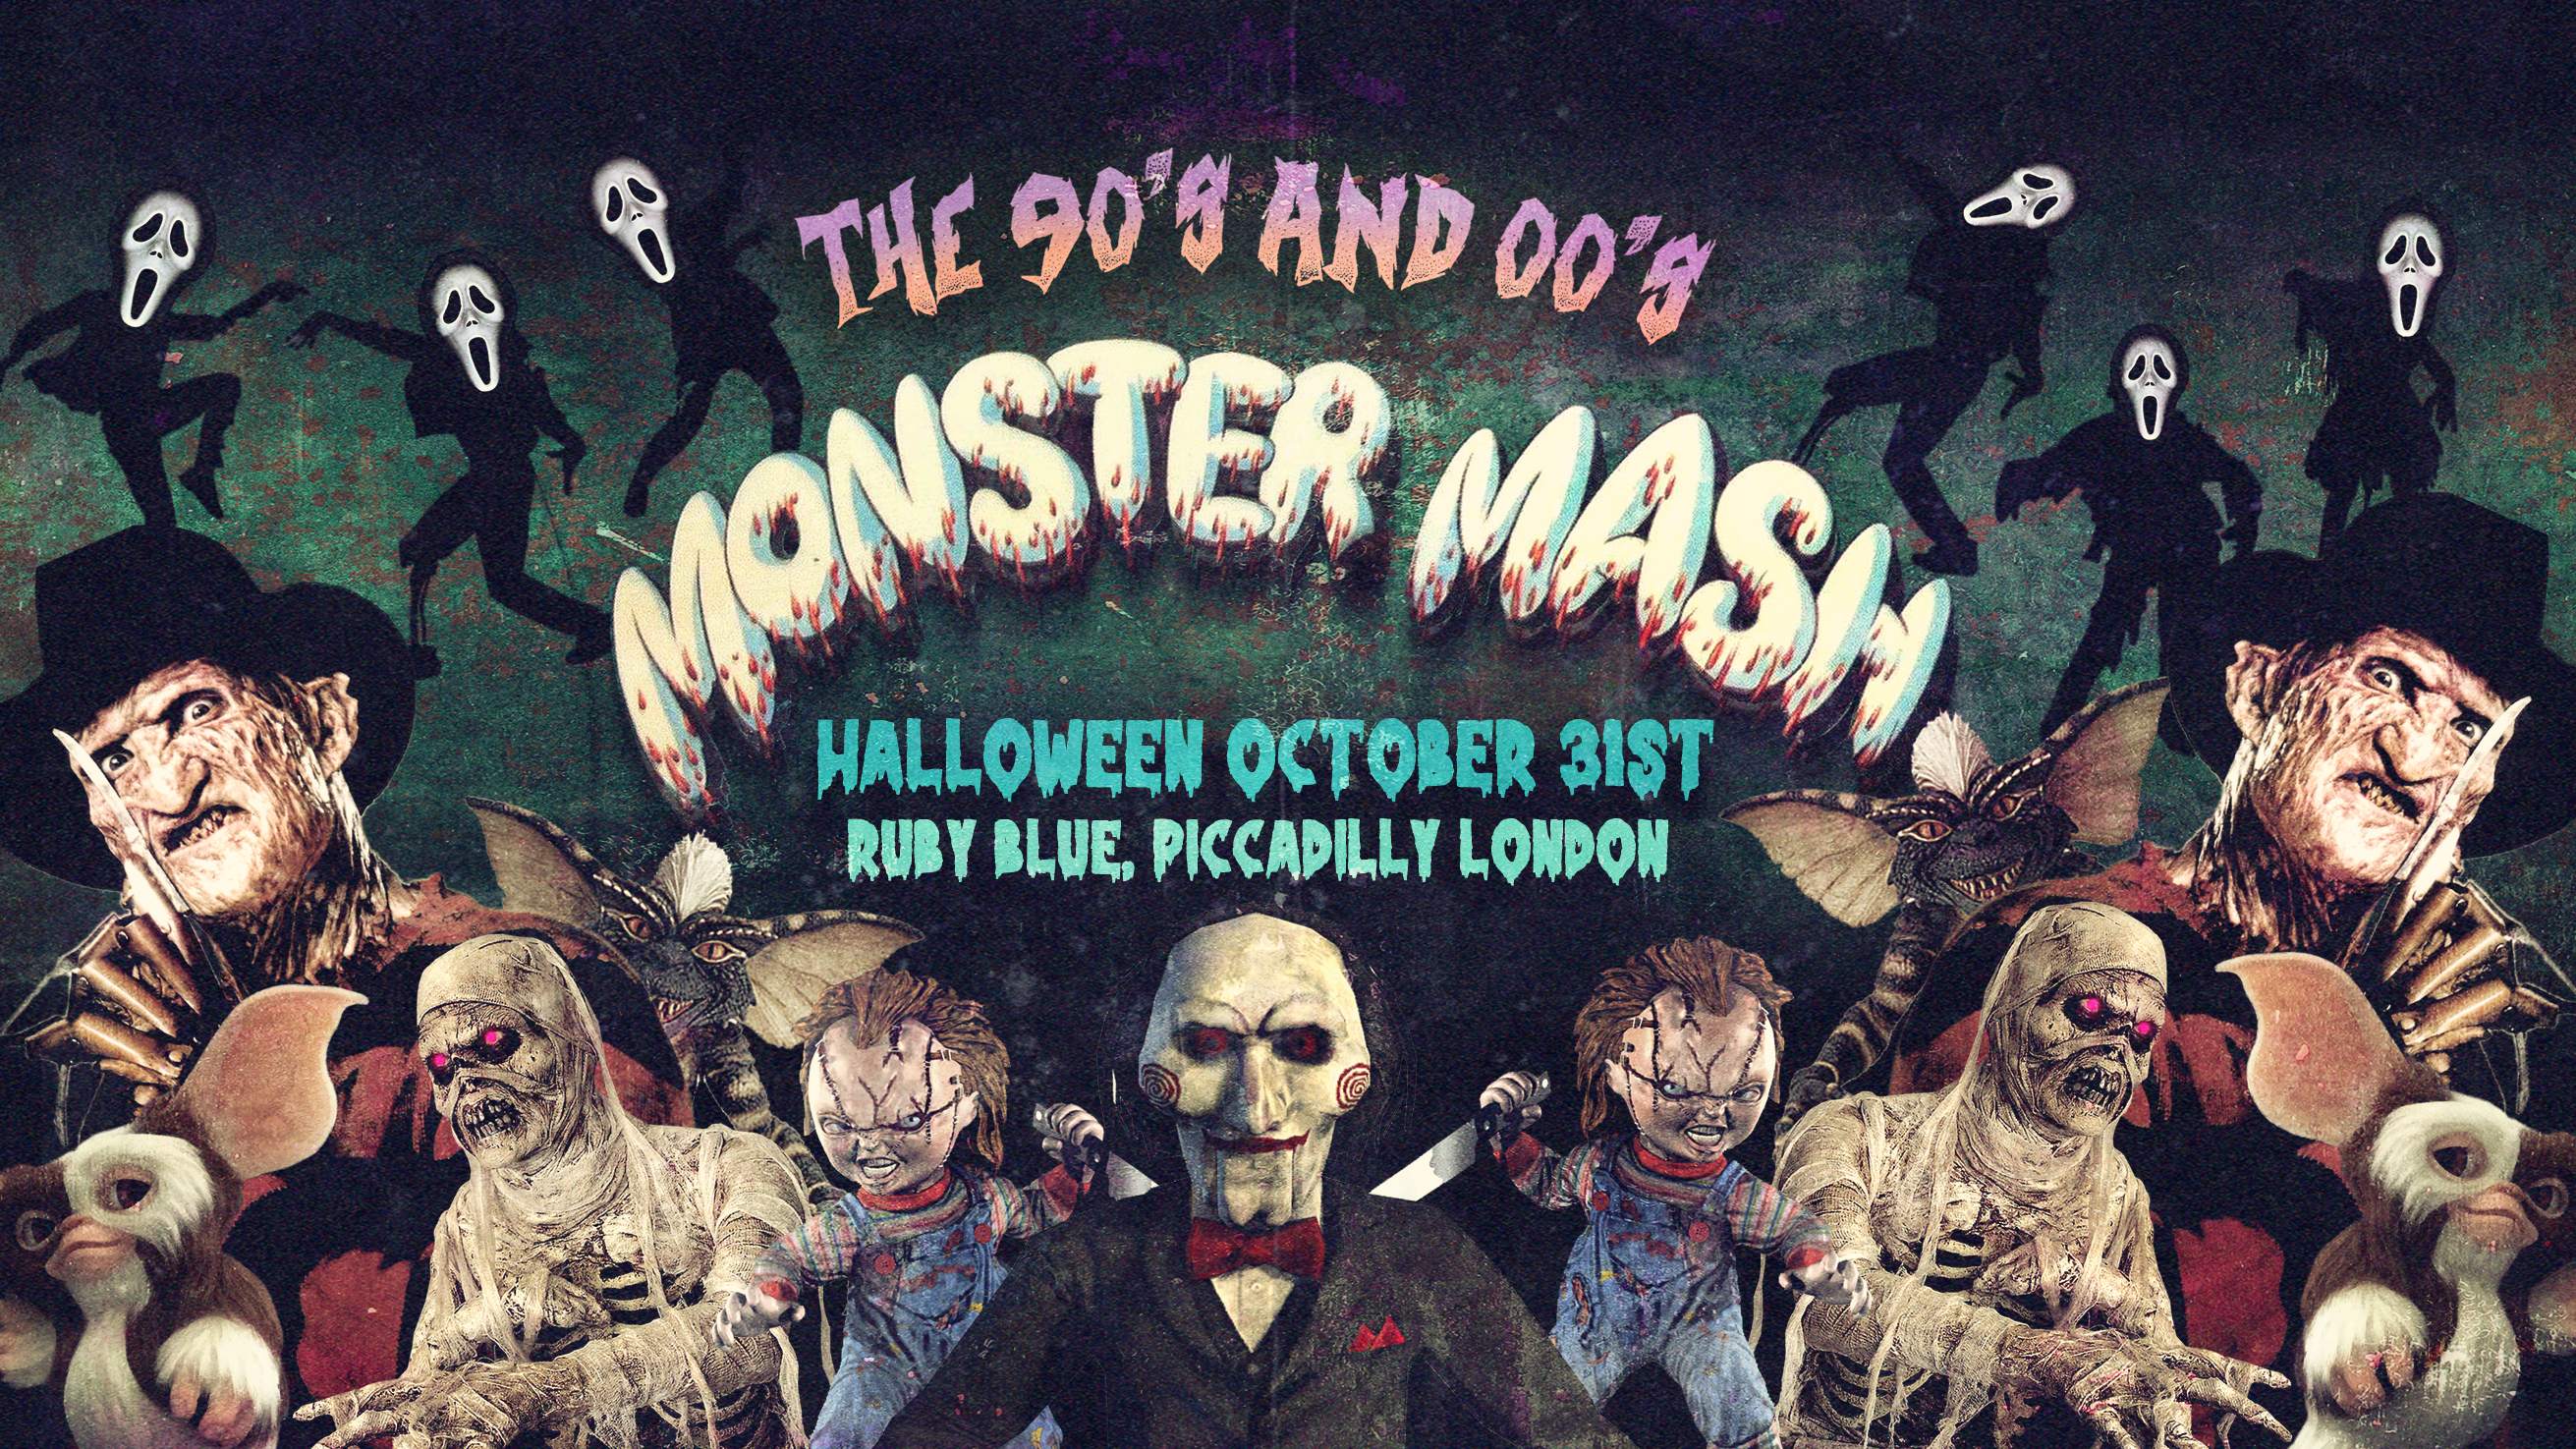 The Monster Mash - 90s & 00s Halloween Party - Página frontal